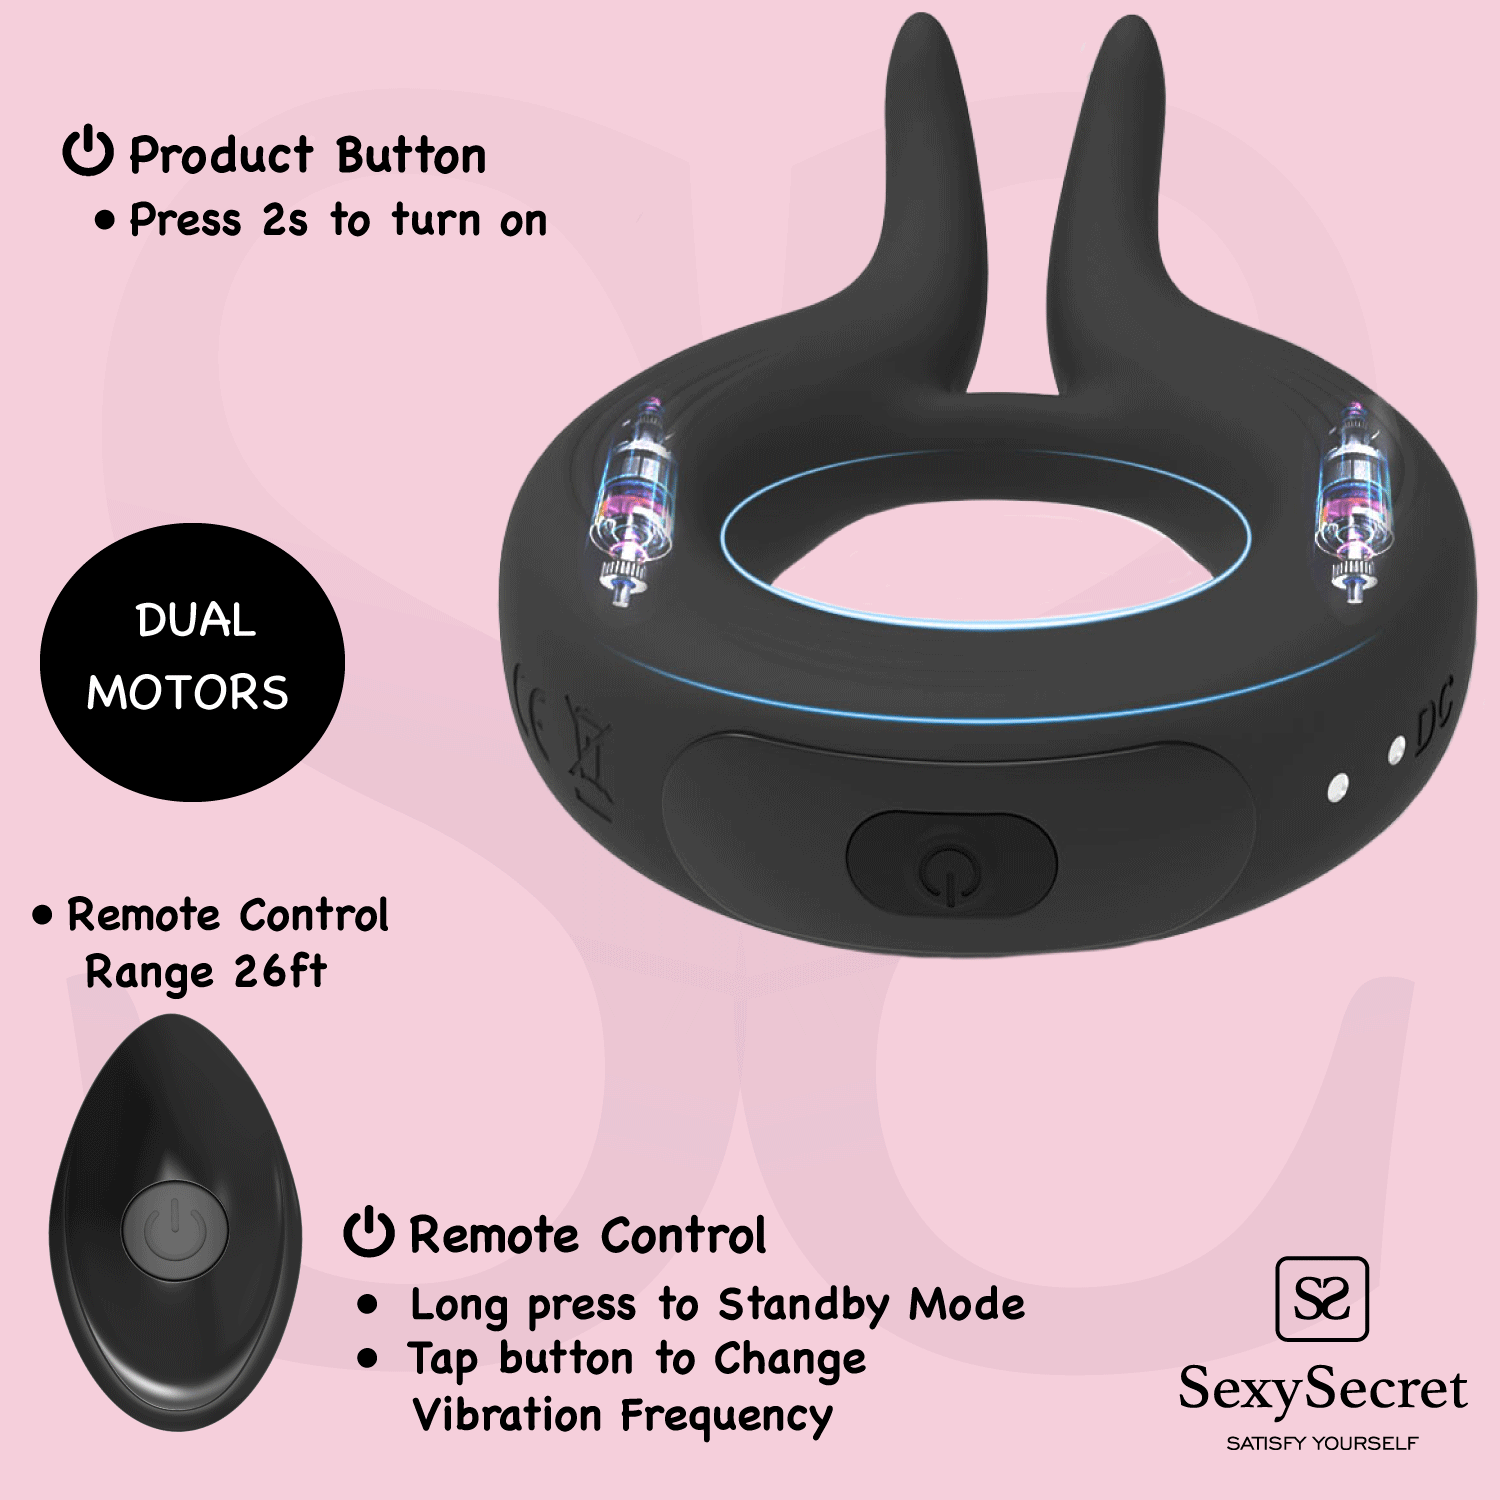 Sexy Secret's Premium 10-Function Vibrating Cock Ring with Remote Control -  Sexy Secret